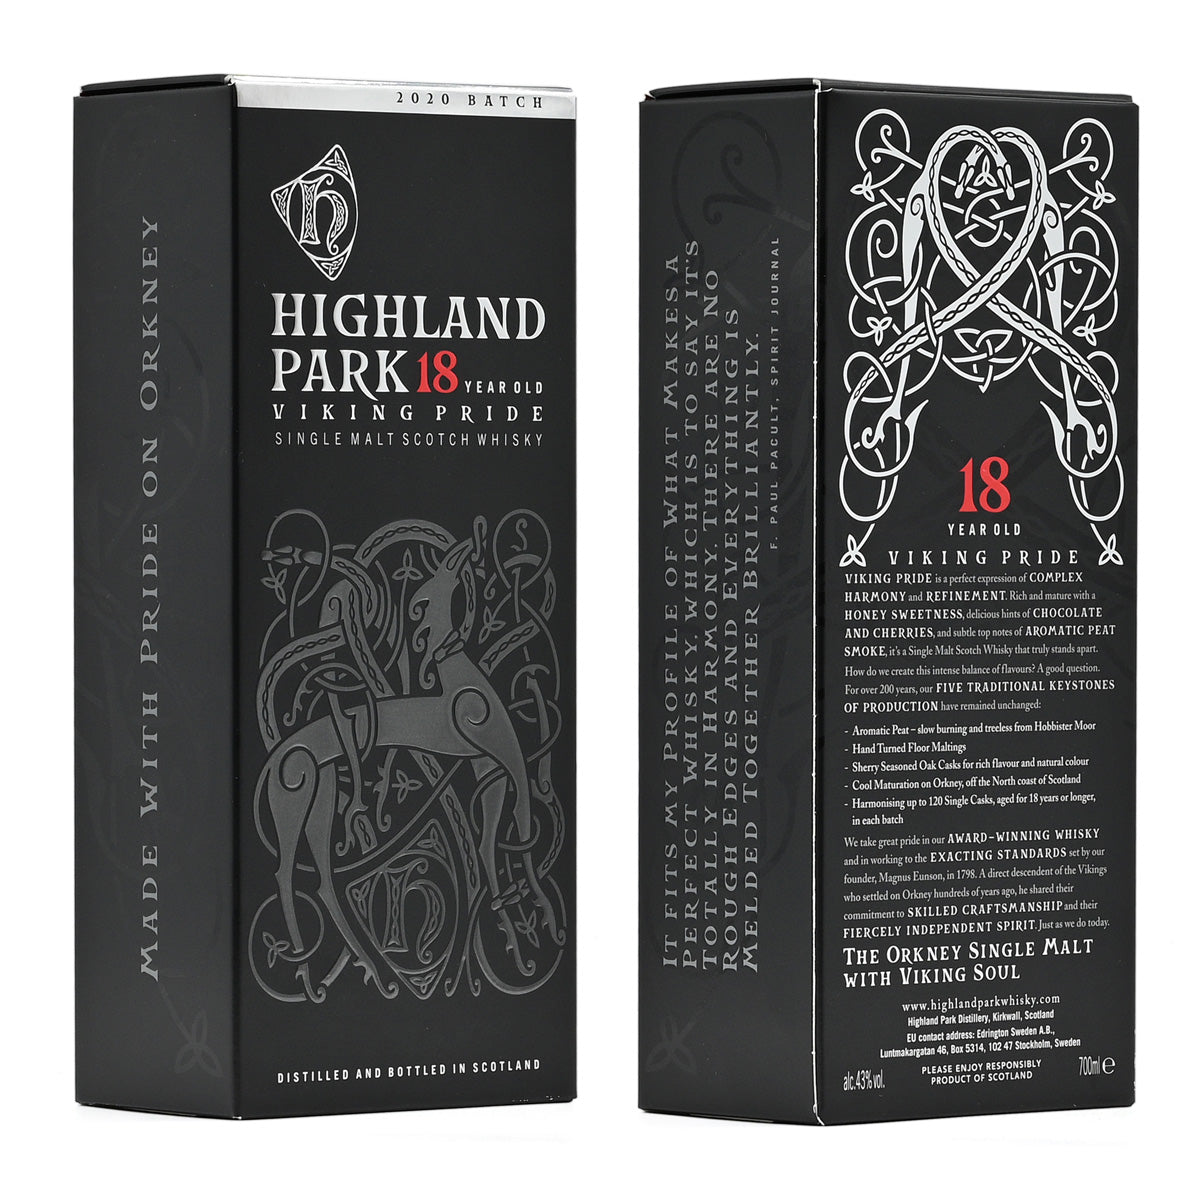 Highland Park 18-year-old Viking Pride single malt Scotch Whisky, from Orkney, the Islands, Scotland – GDV Fine Wines, Hong Kong